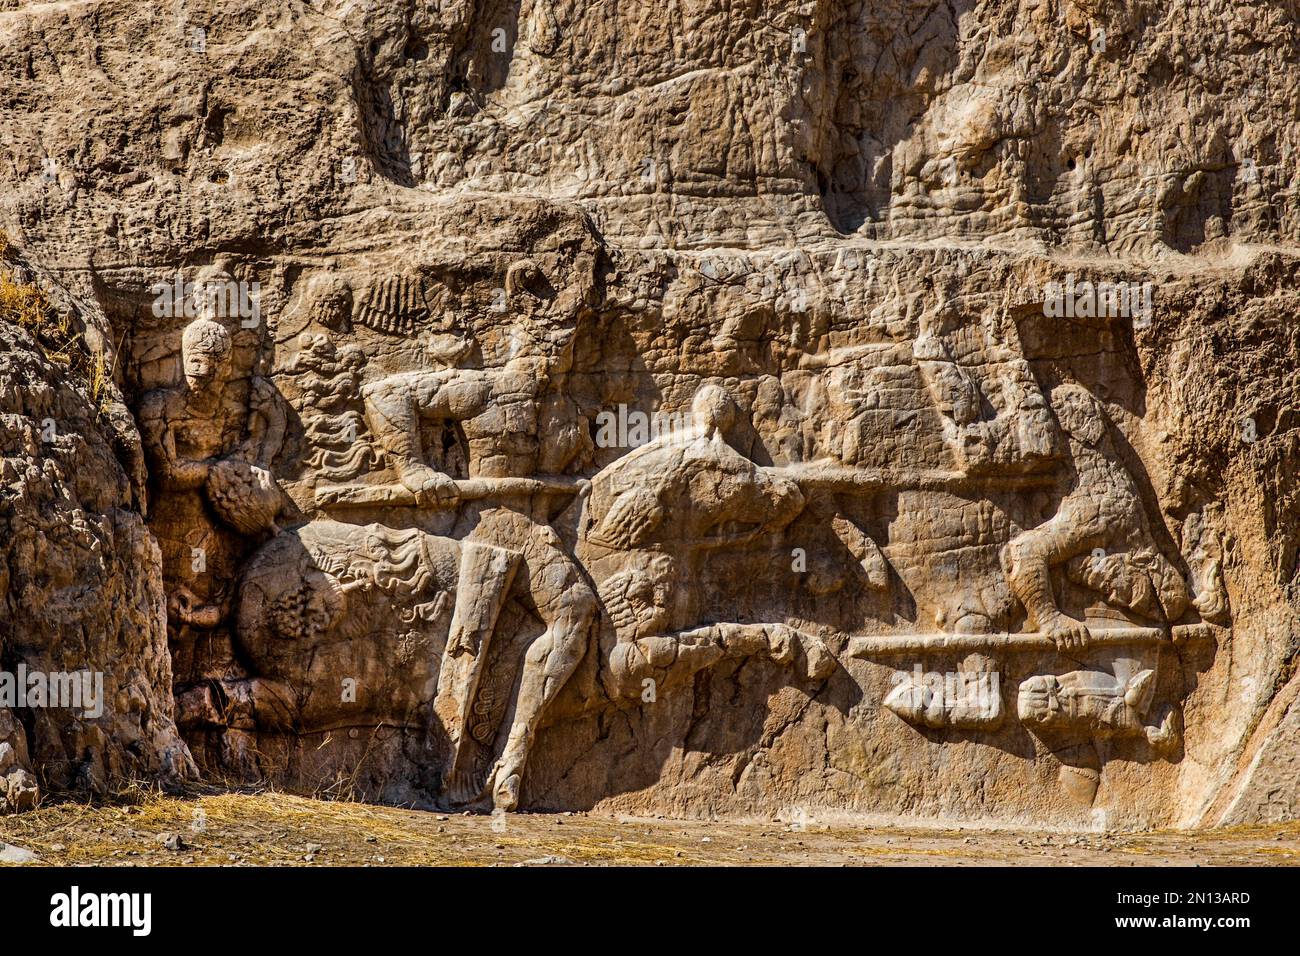 Equestrian victory of Hormozd II (A. D. 302-309), Naqsh-e Rostam, Rock tombs of the Great Kings, Naqsh-e Rostam, Iran, Asia Stock Photo